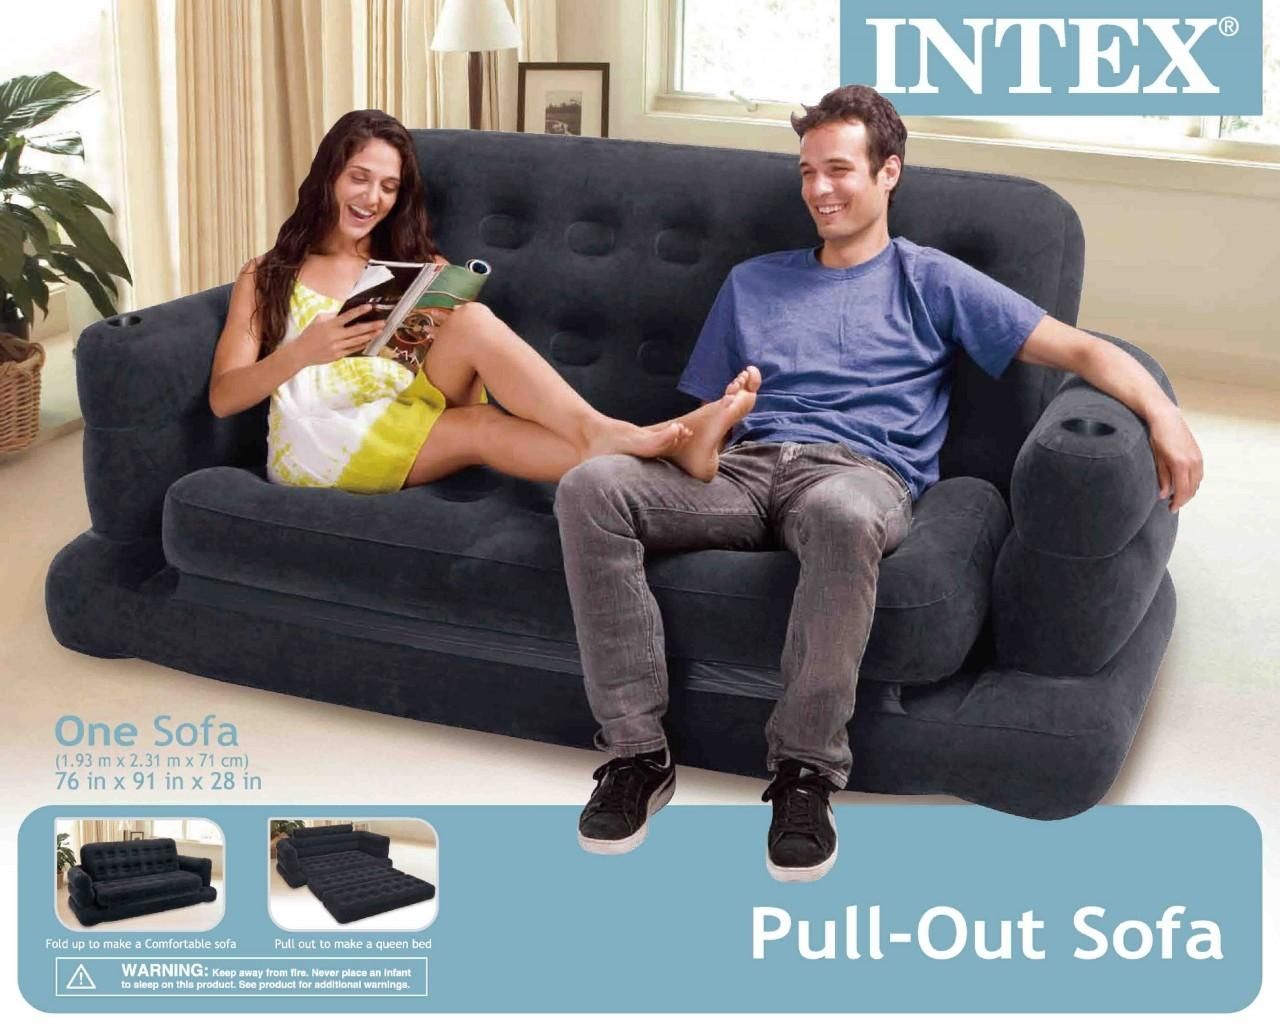 Intex Inflatable Pull Out Sofa And Queen Air Mattress Within Intex Queen Sleeper Sofas (View 3 of 20)